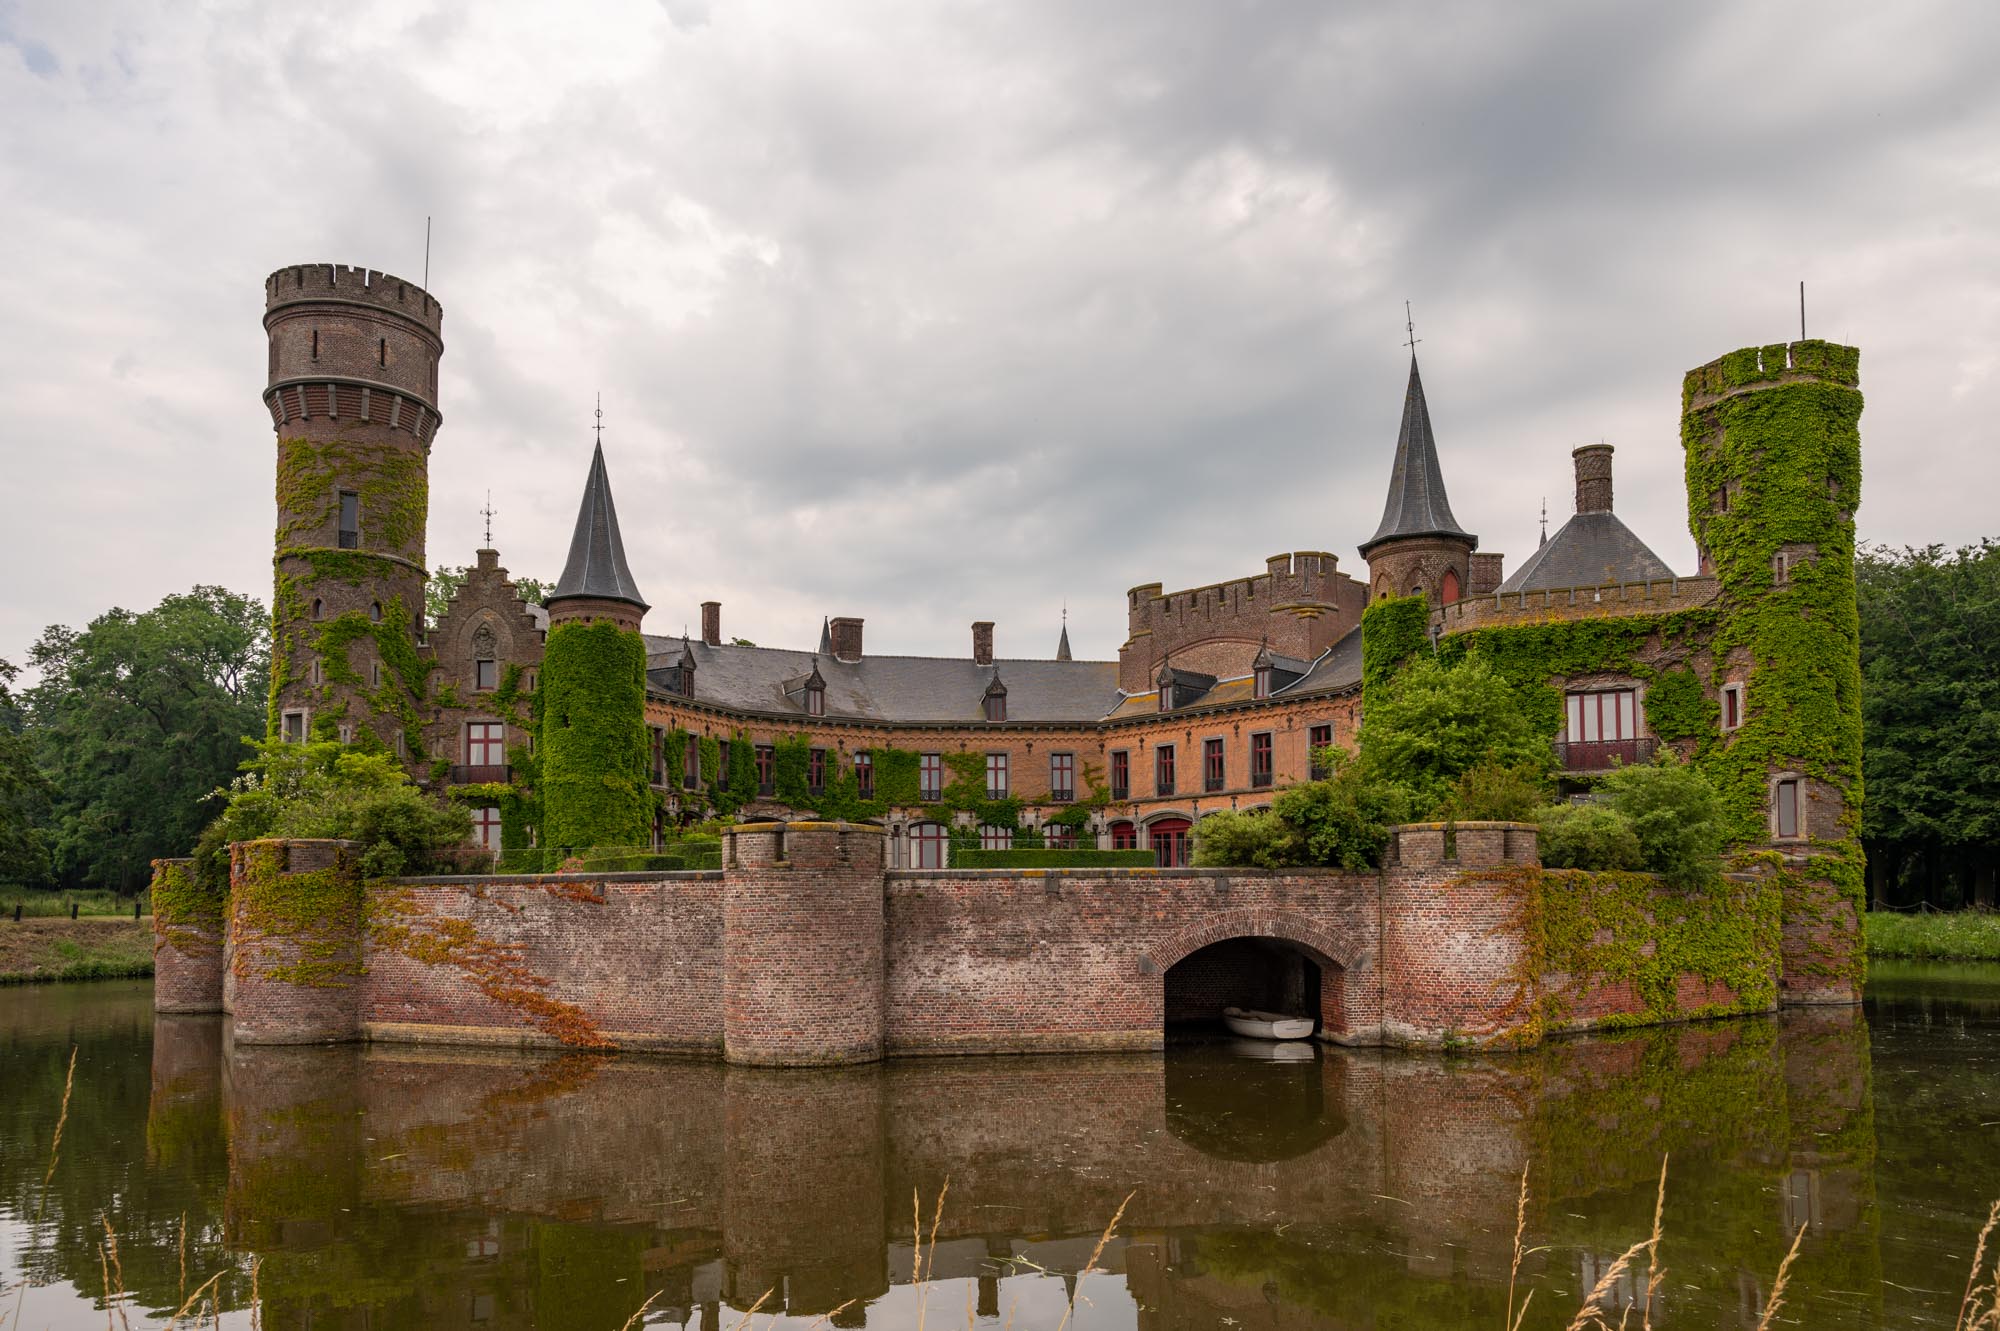 West Flanders' castle in the area of Bruges